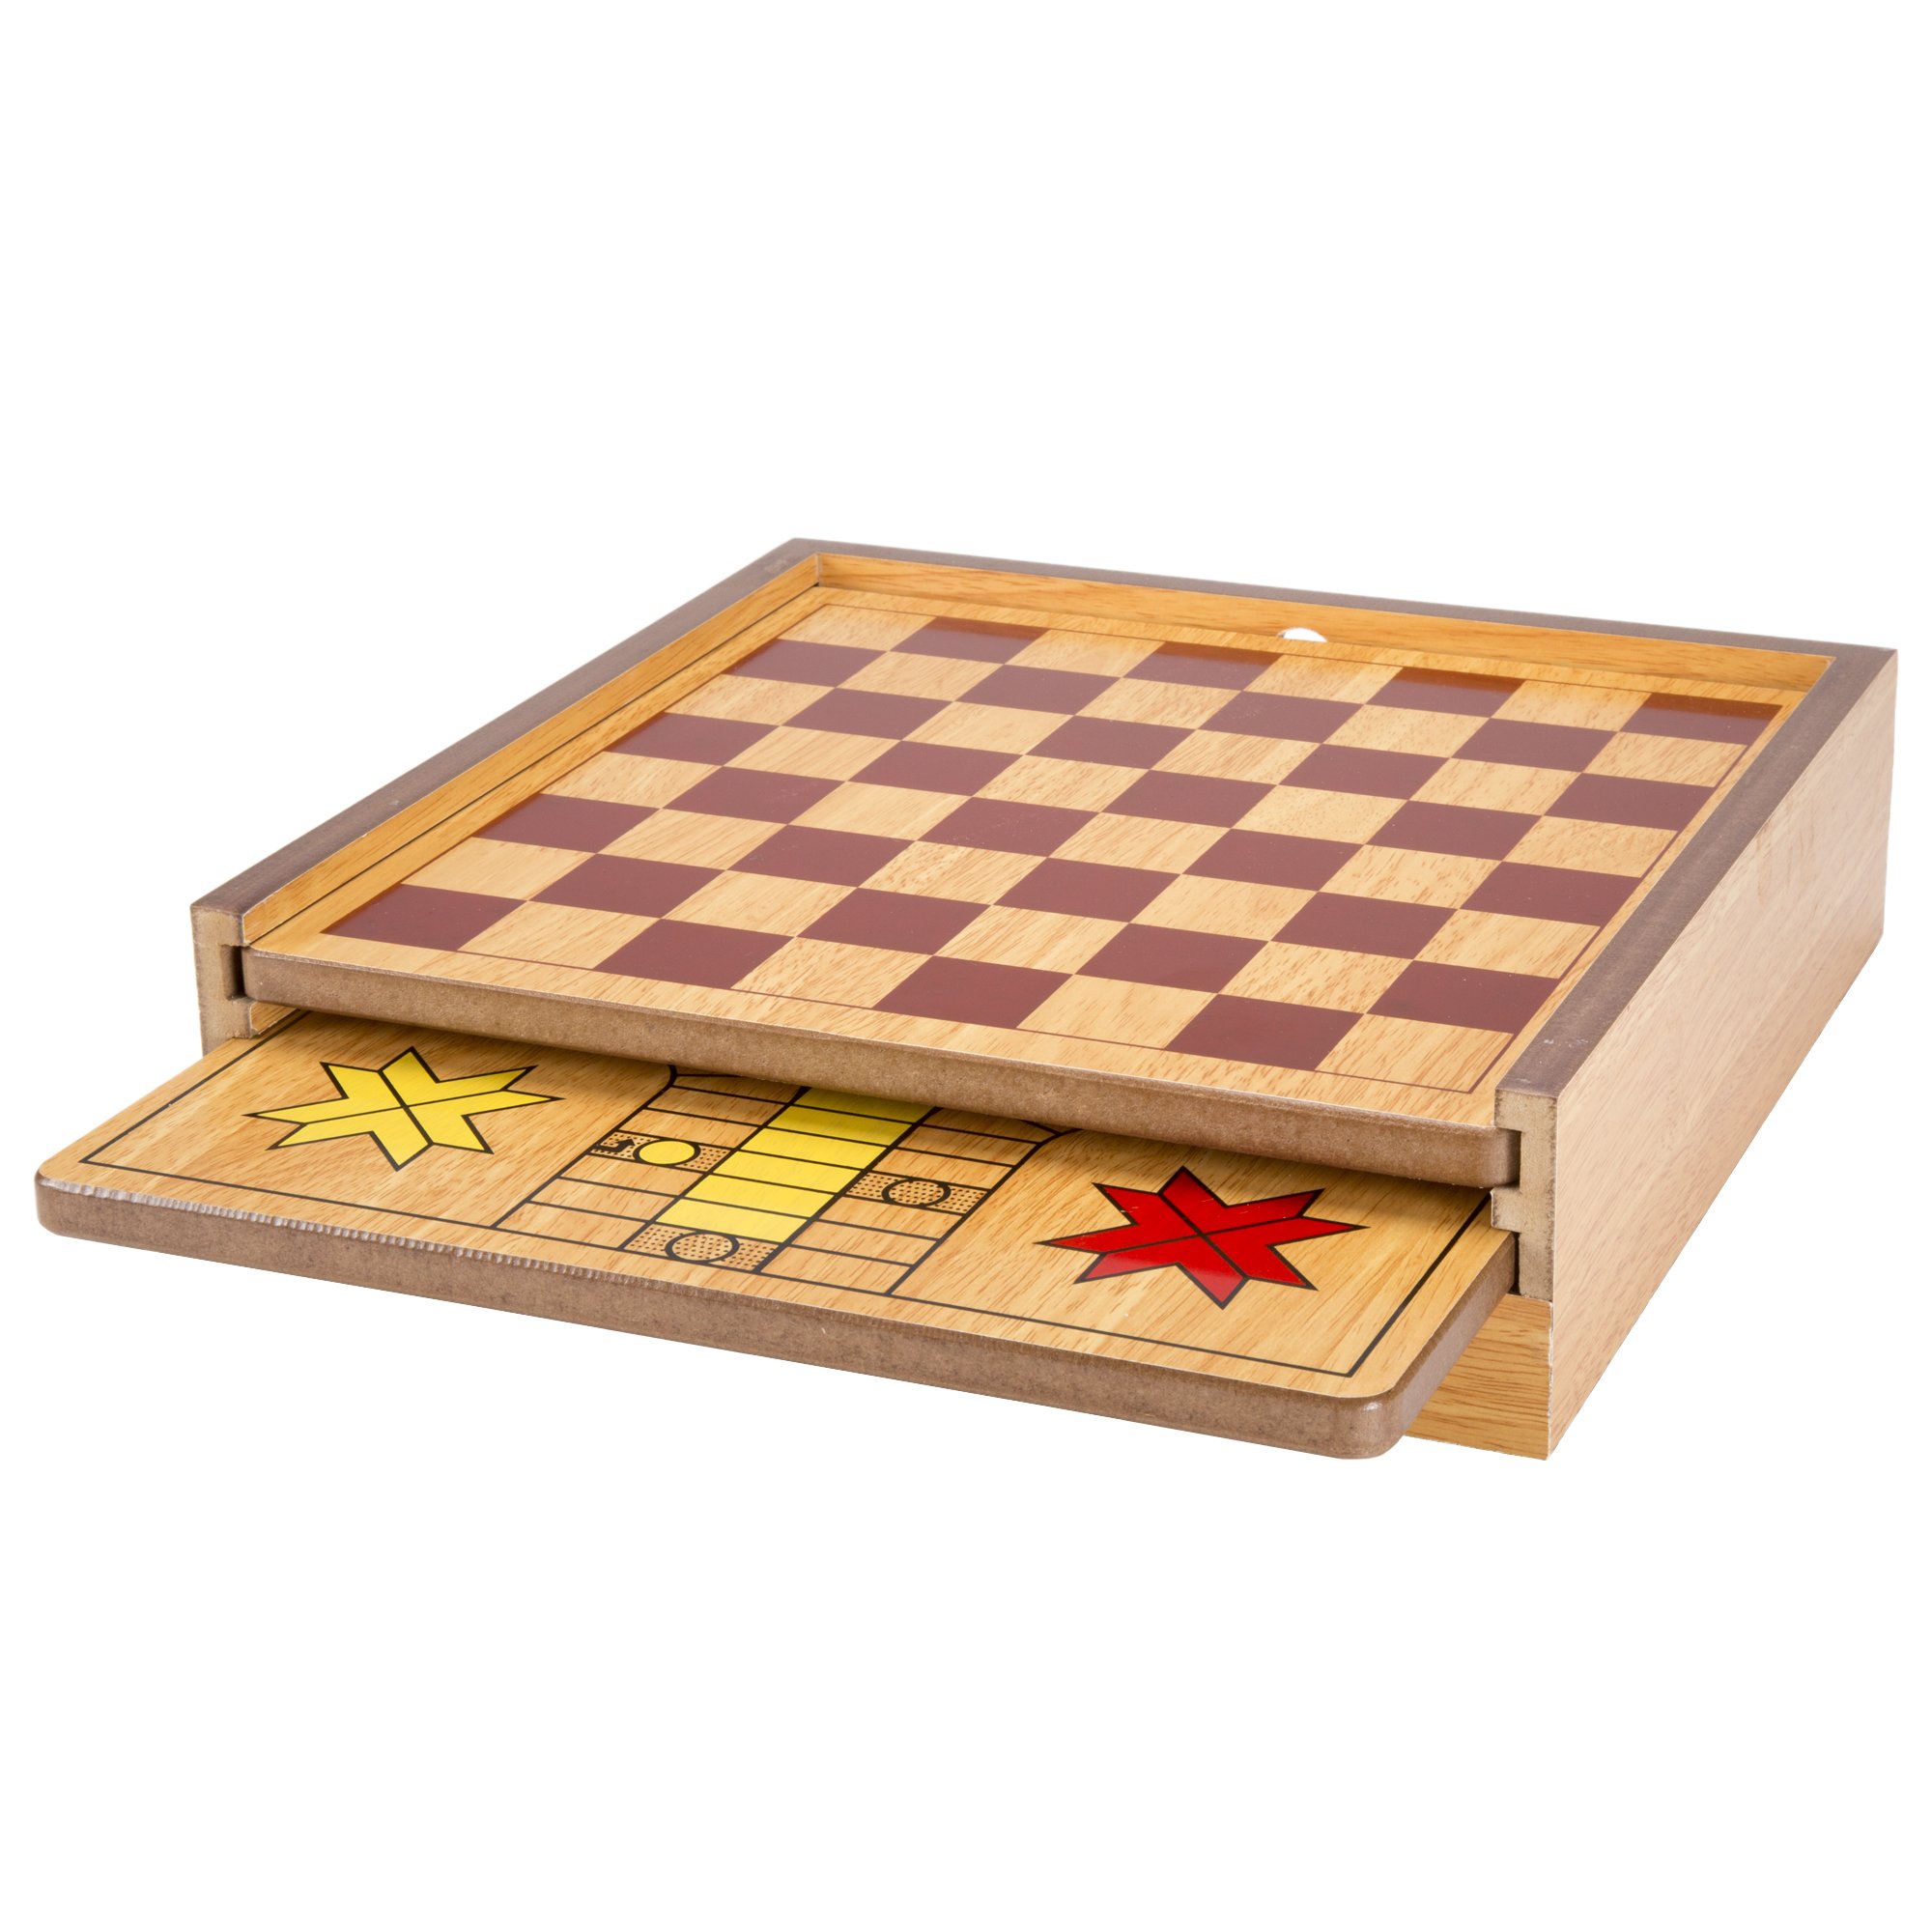 7-in-1 Combo Game with Chess, Ludo, Chinese Checkers & More,11.5 x 12 x 3 inches